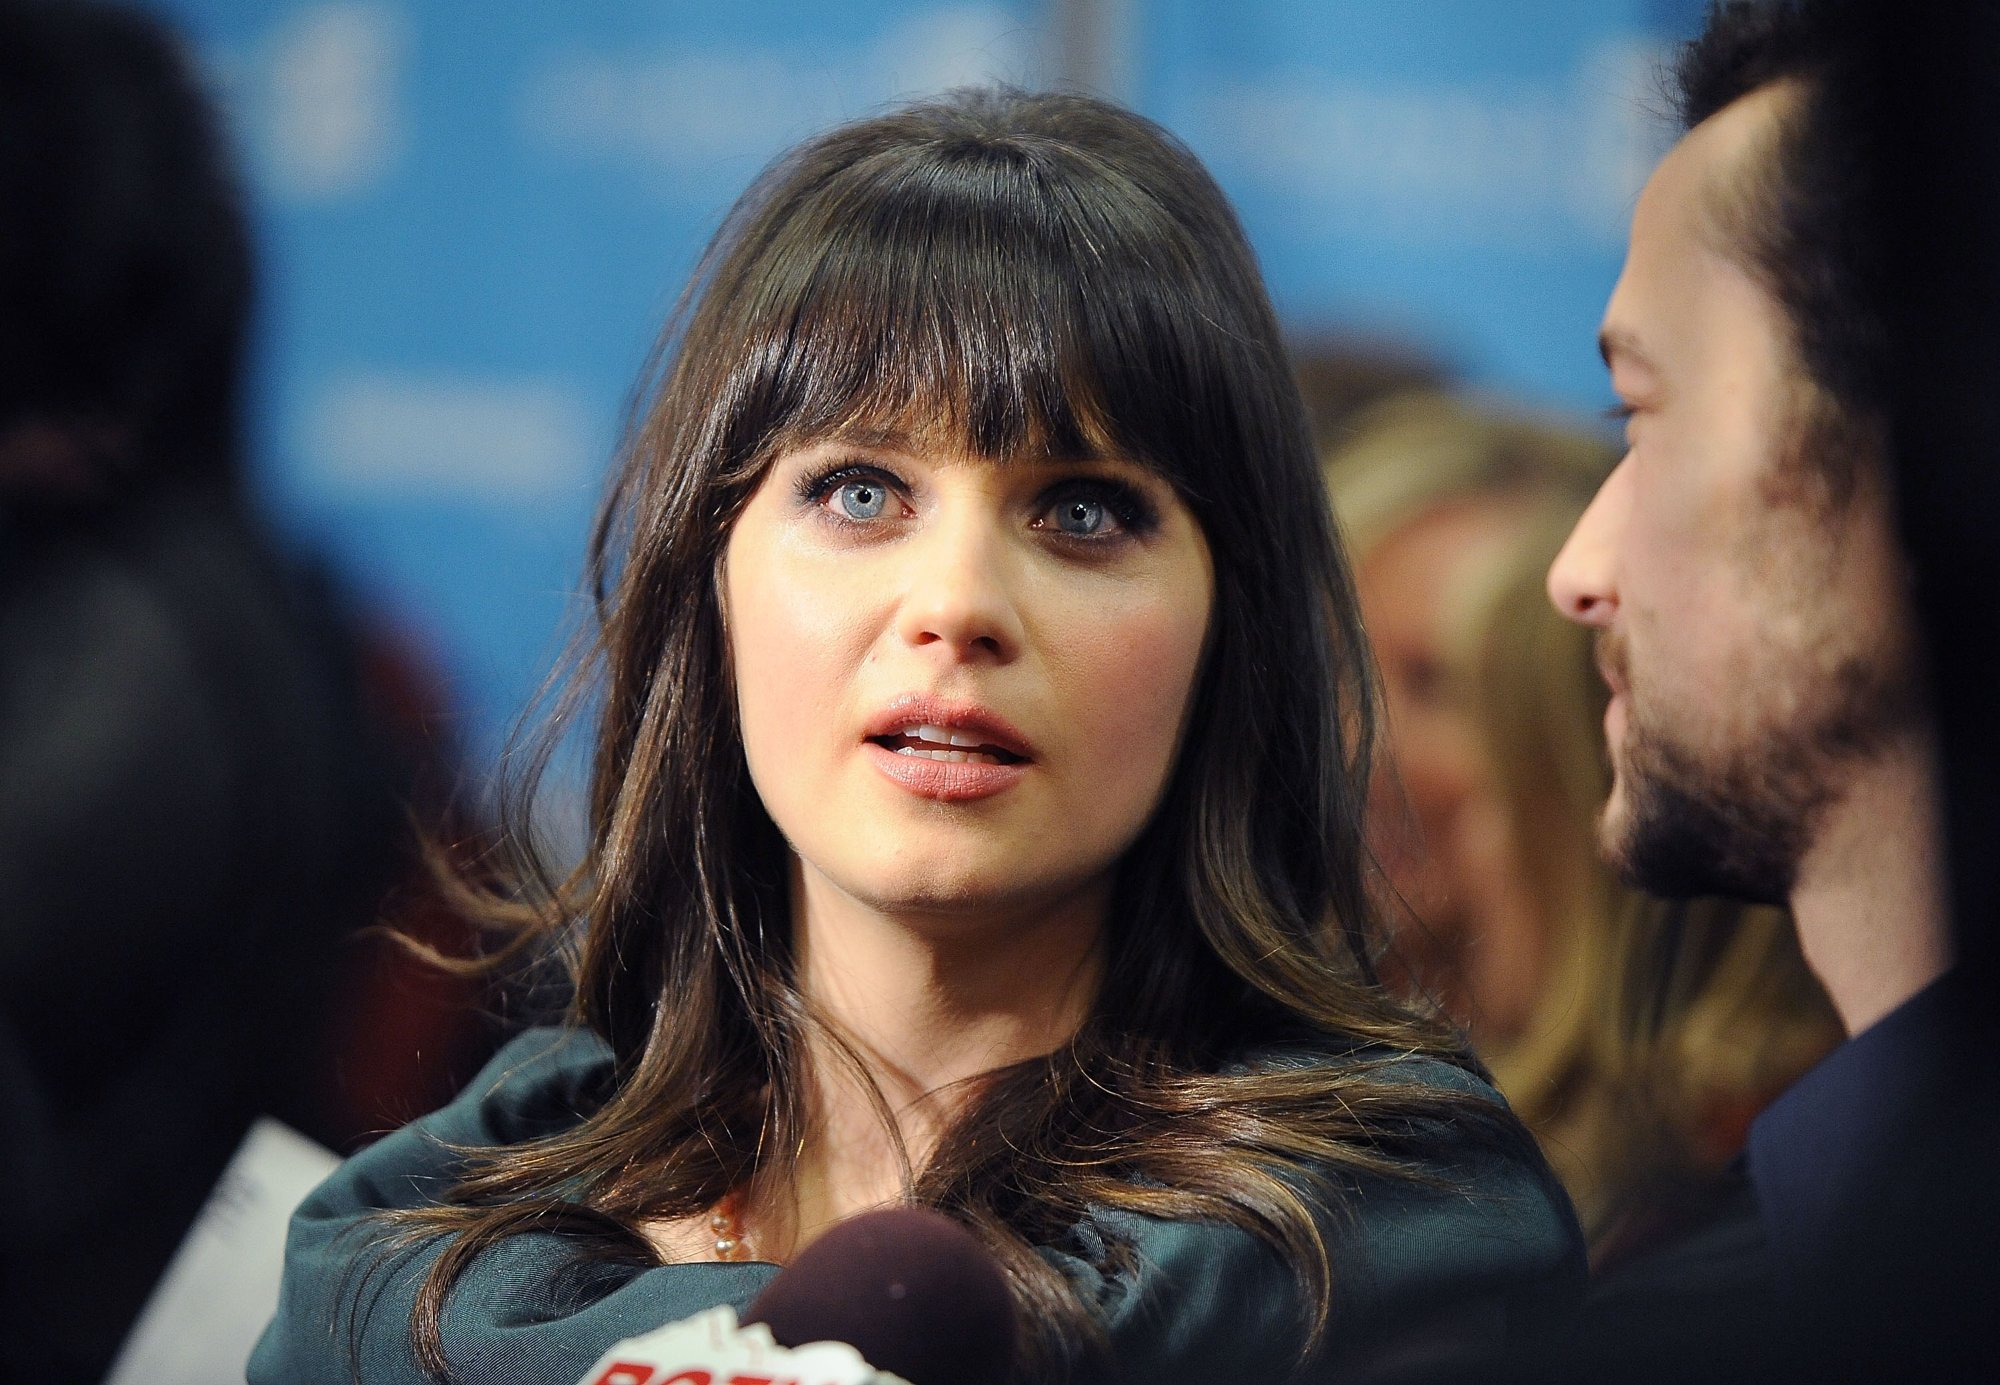 '500 Days of Summer' Zooey Deschanel at the Sundance premiere looking straight ahead with a microphone in front of her